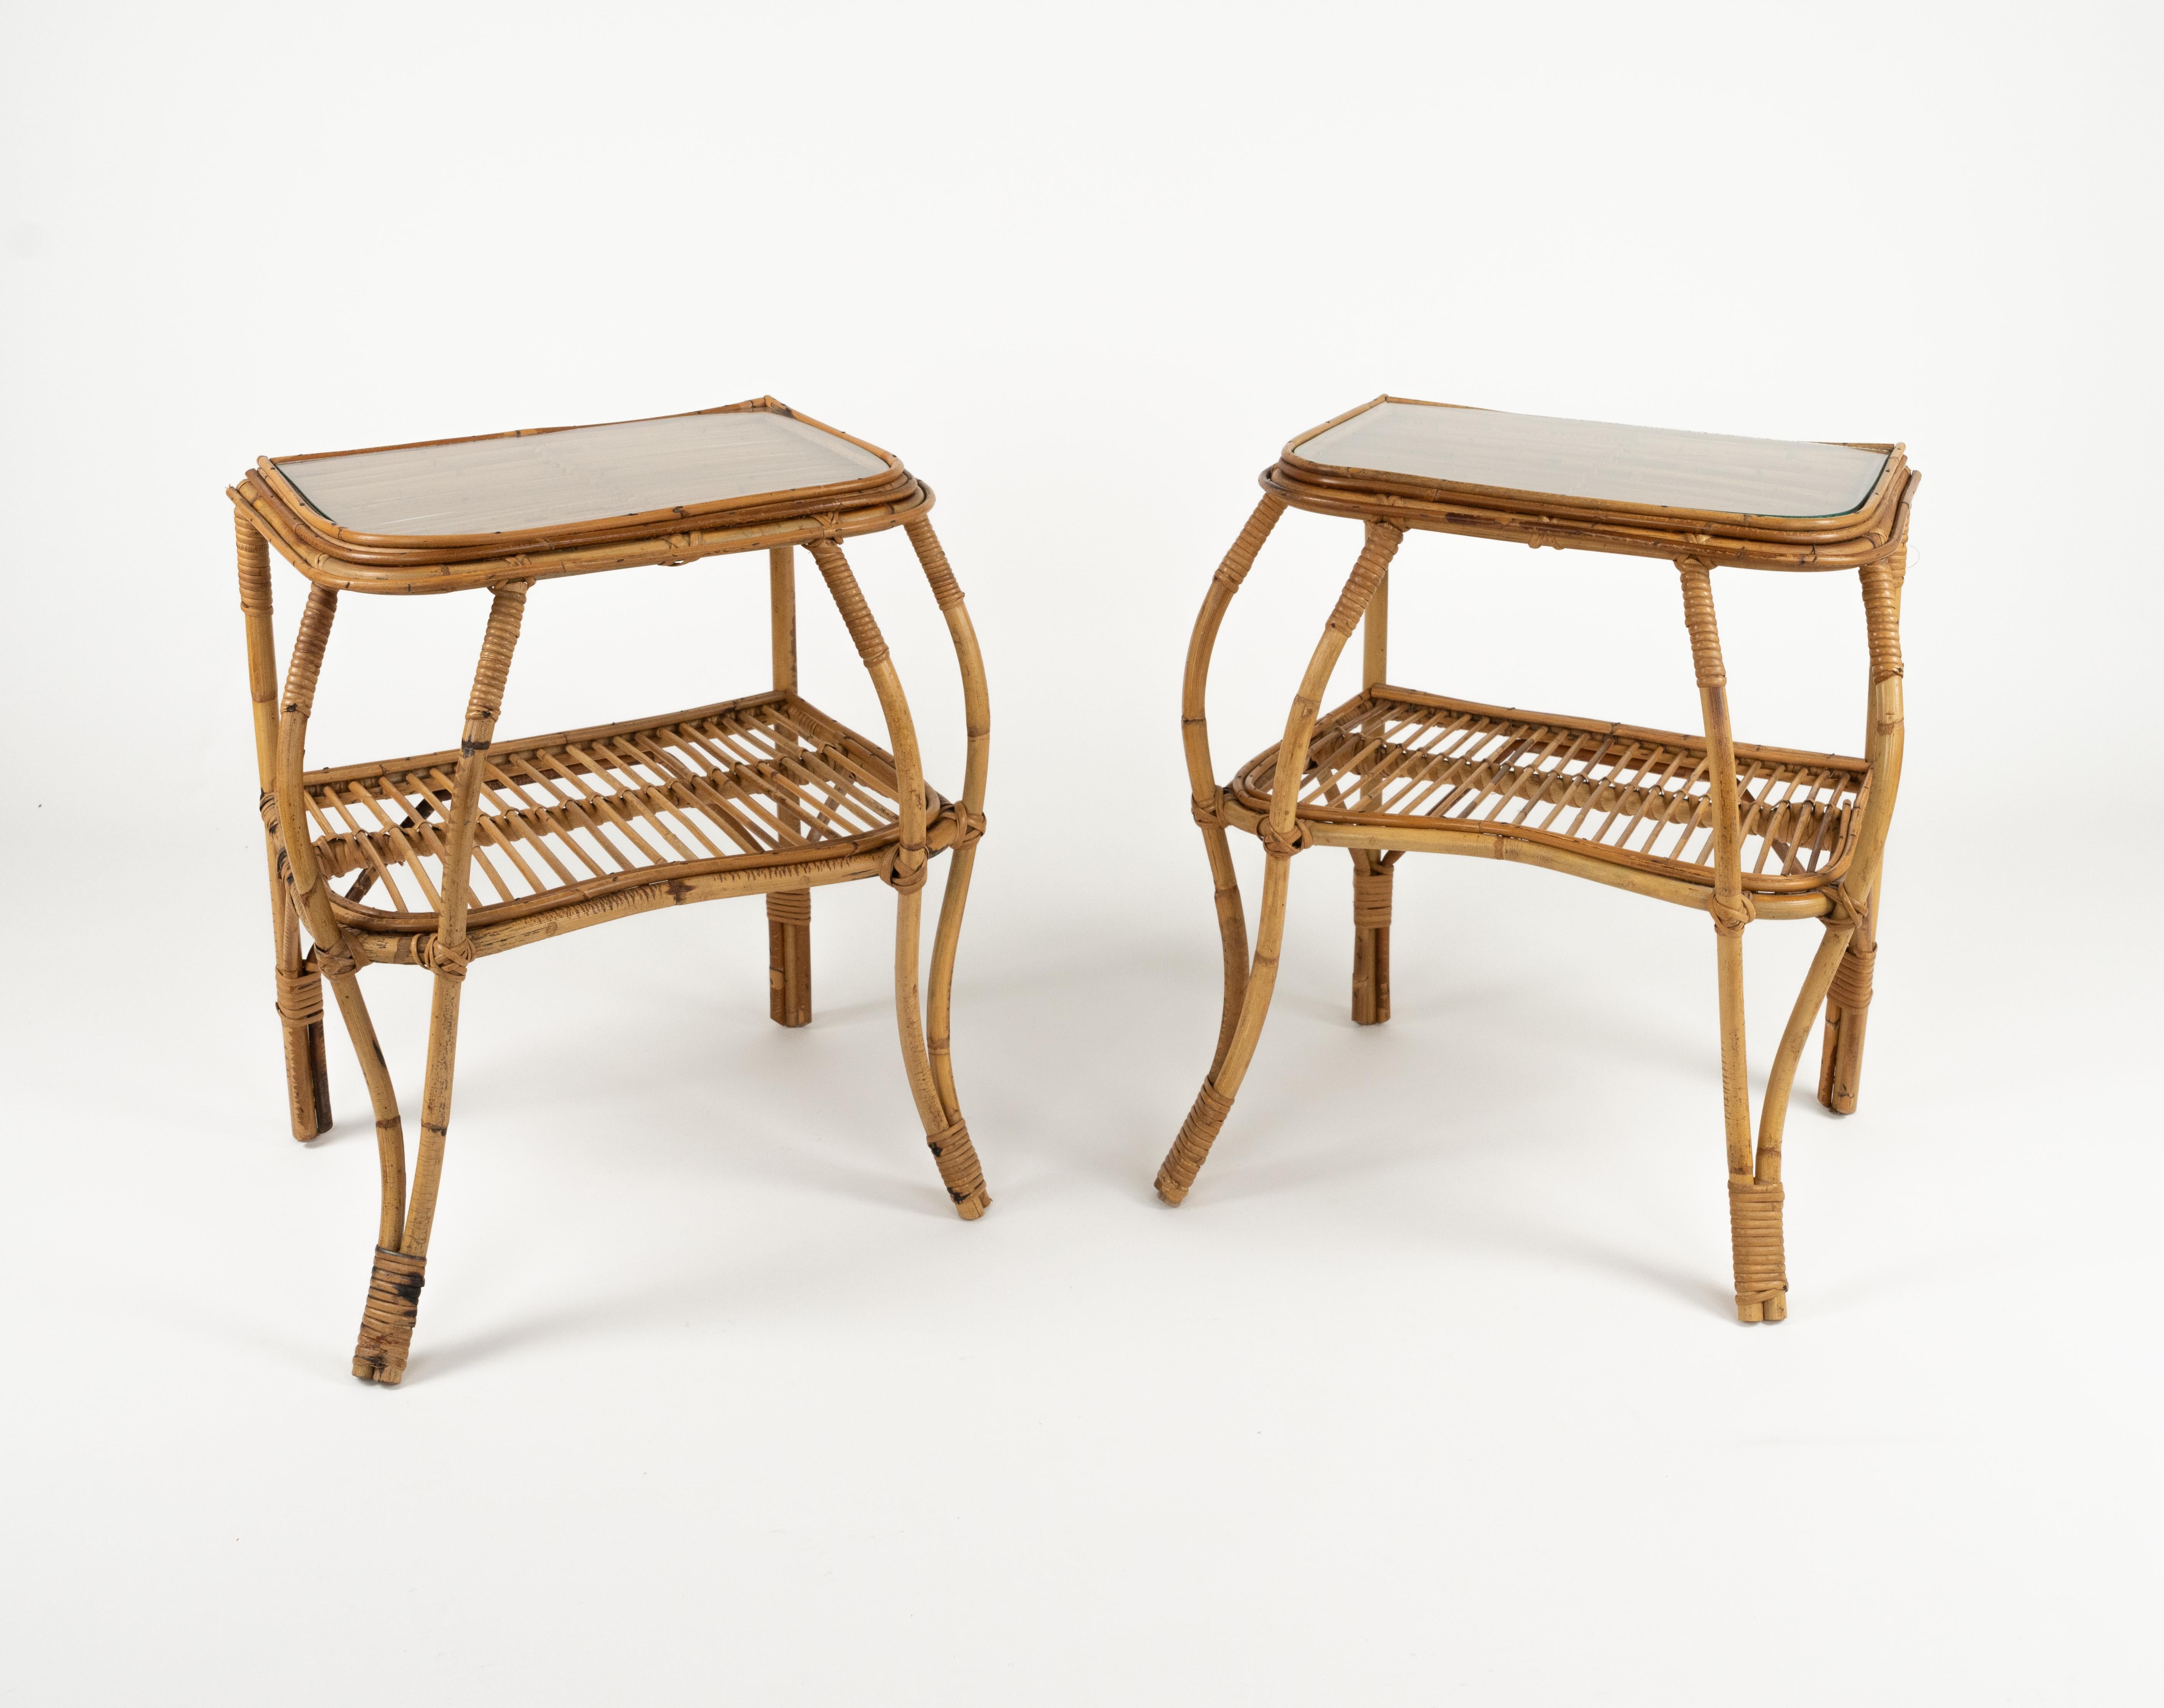 Midcentury amazing pair of bedside tables in bamboo, rattan and glass top.

Made in Italy in the 1960s.

Sinuous shapes of legs adds fullness whilst keeping its lightness .